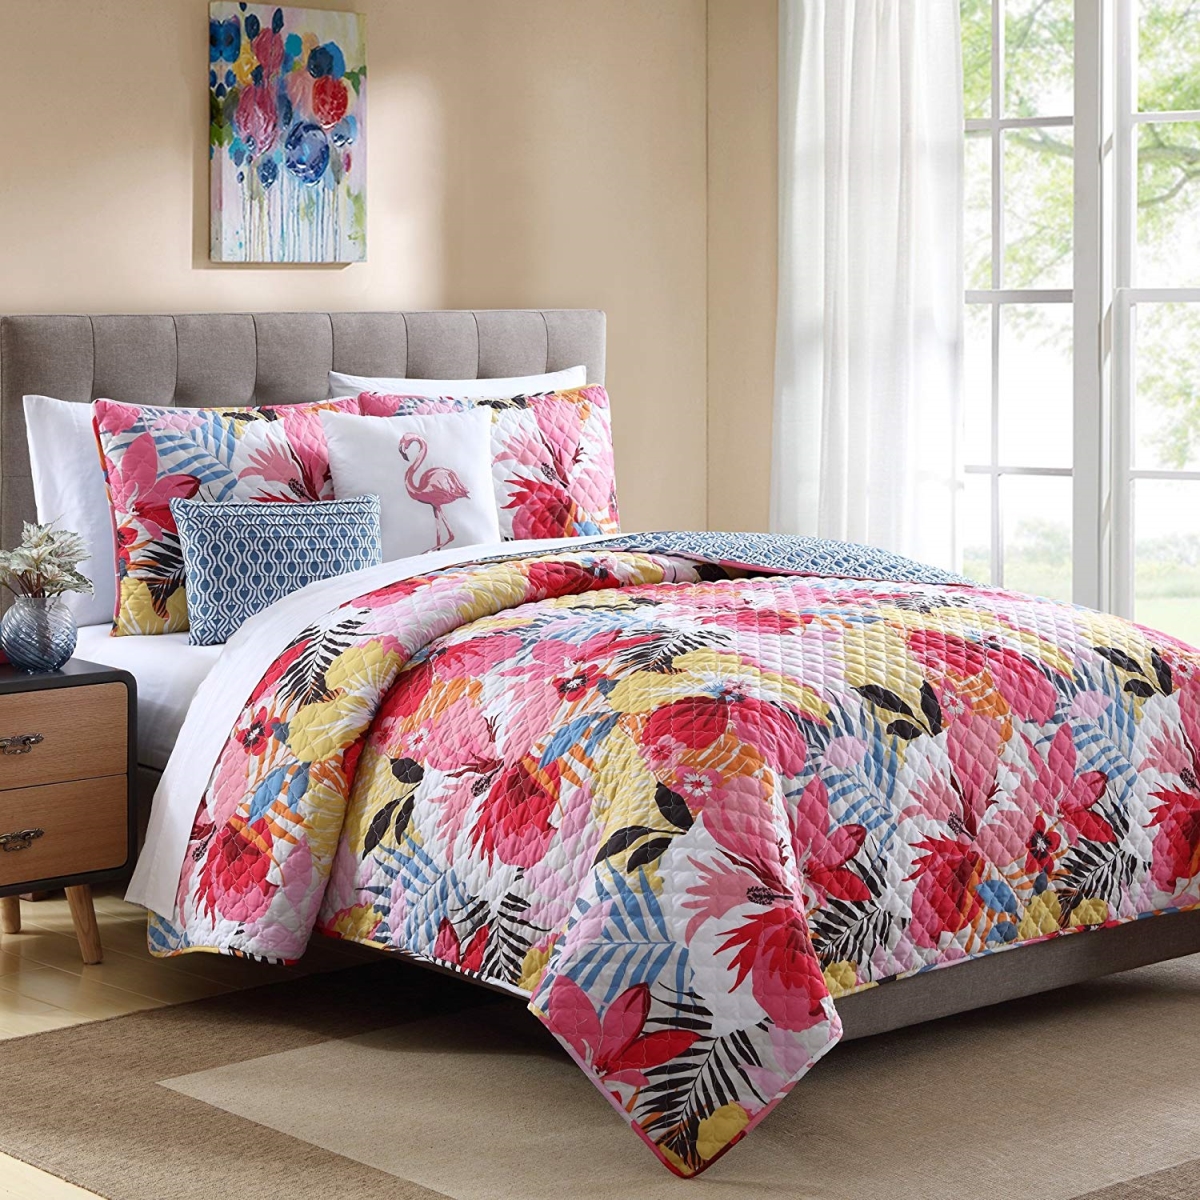 18511703bw-mul Lanai Quilt Set, Pink - Full & Queen Size, 5 Piece